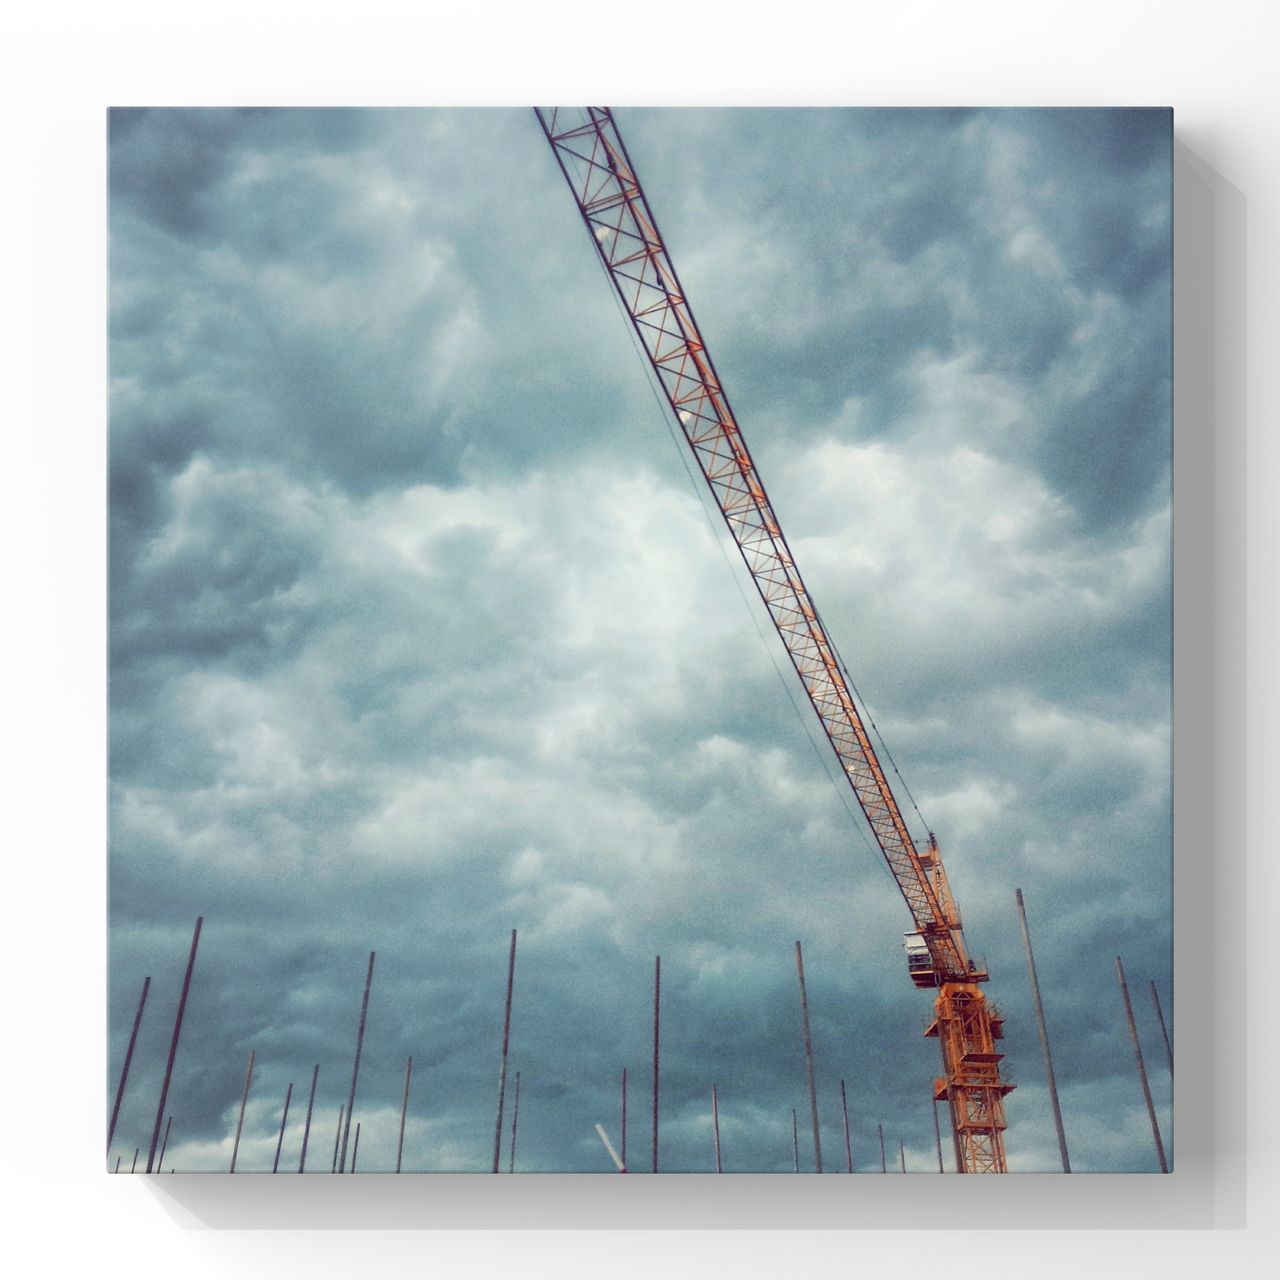 transfer print, sky, auto post production filter, cloud - sky, cloudy, low angle view, cloud, weather, overcast, built structure, water, connection, day, outdoors, nature, transportation, architecture, no people, metal, tall - high